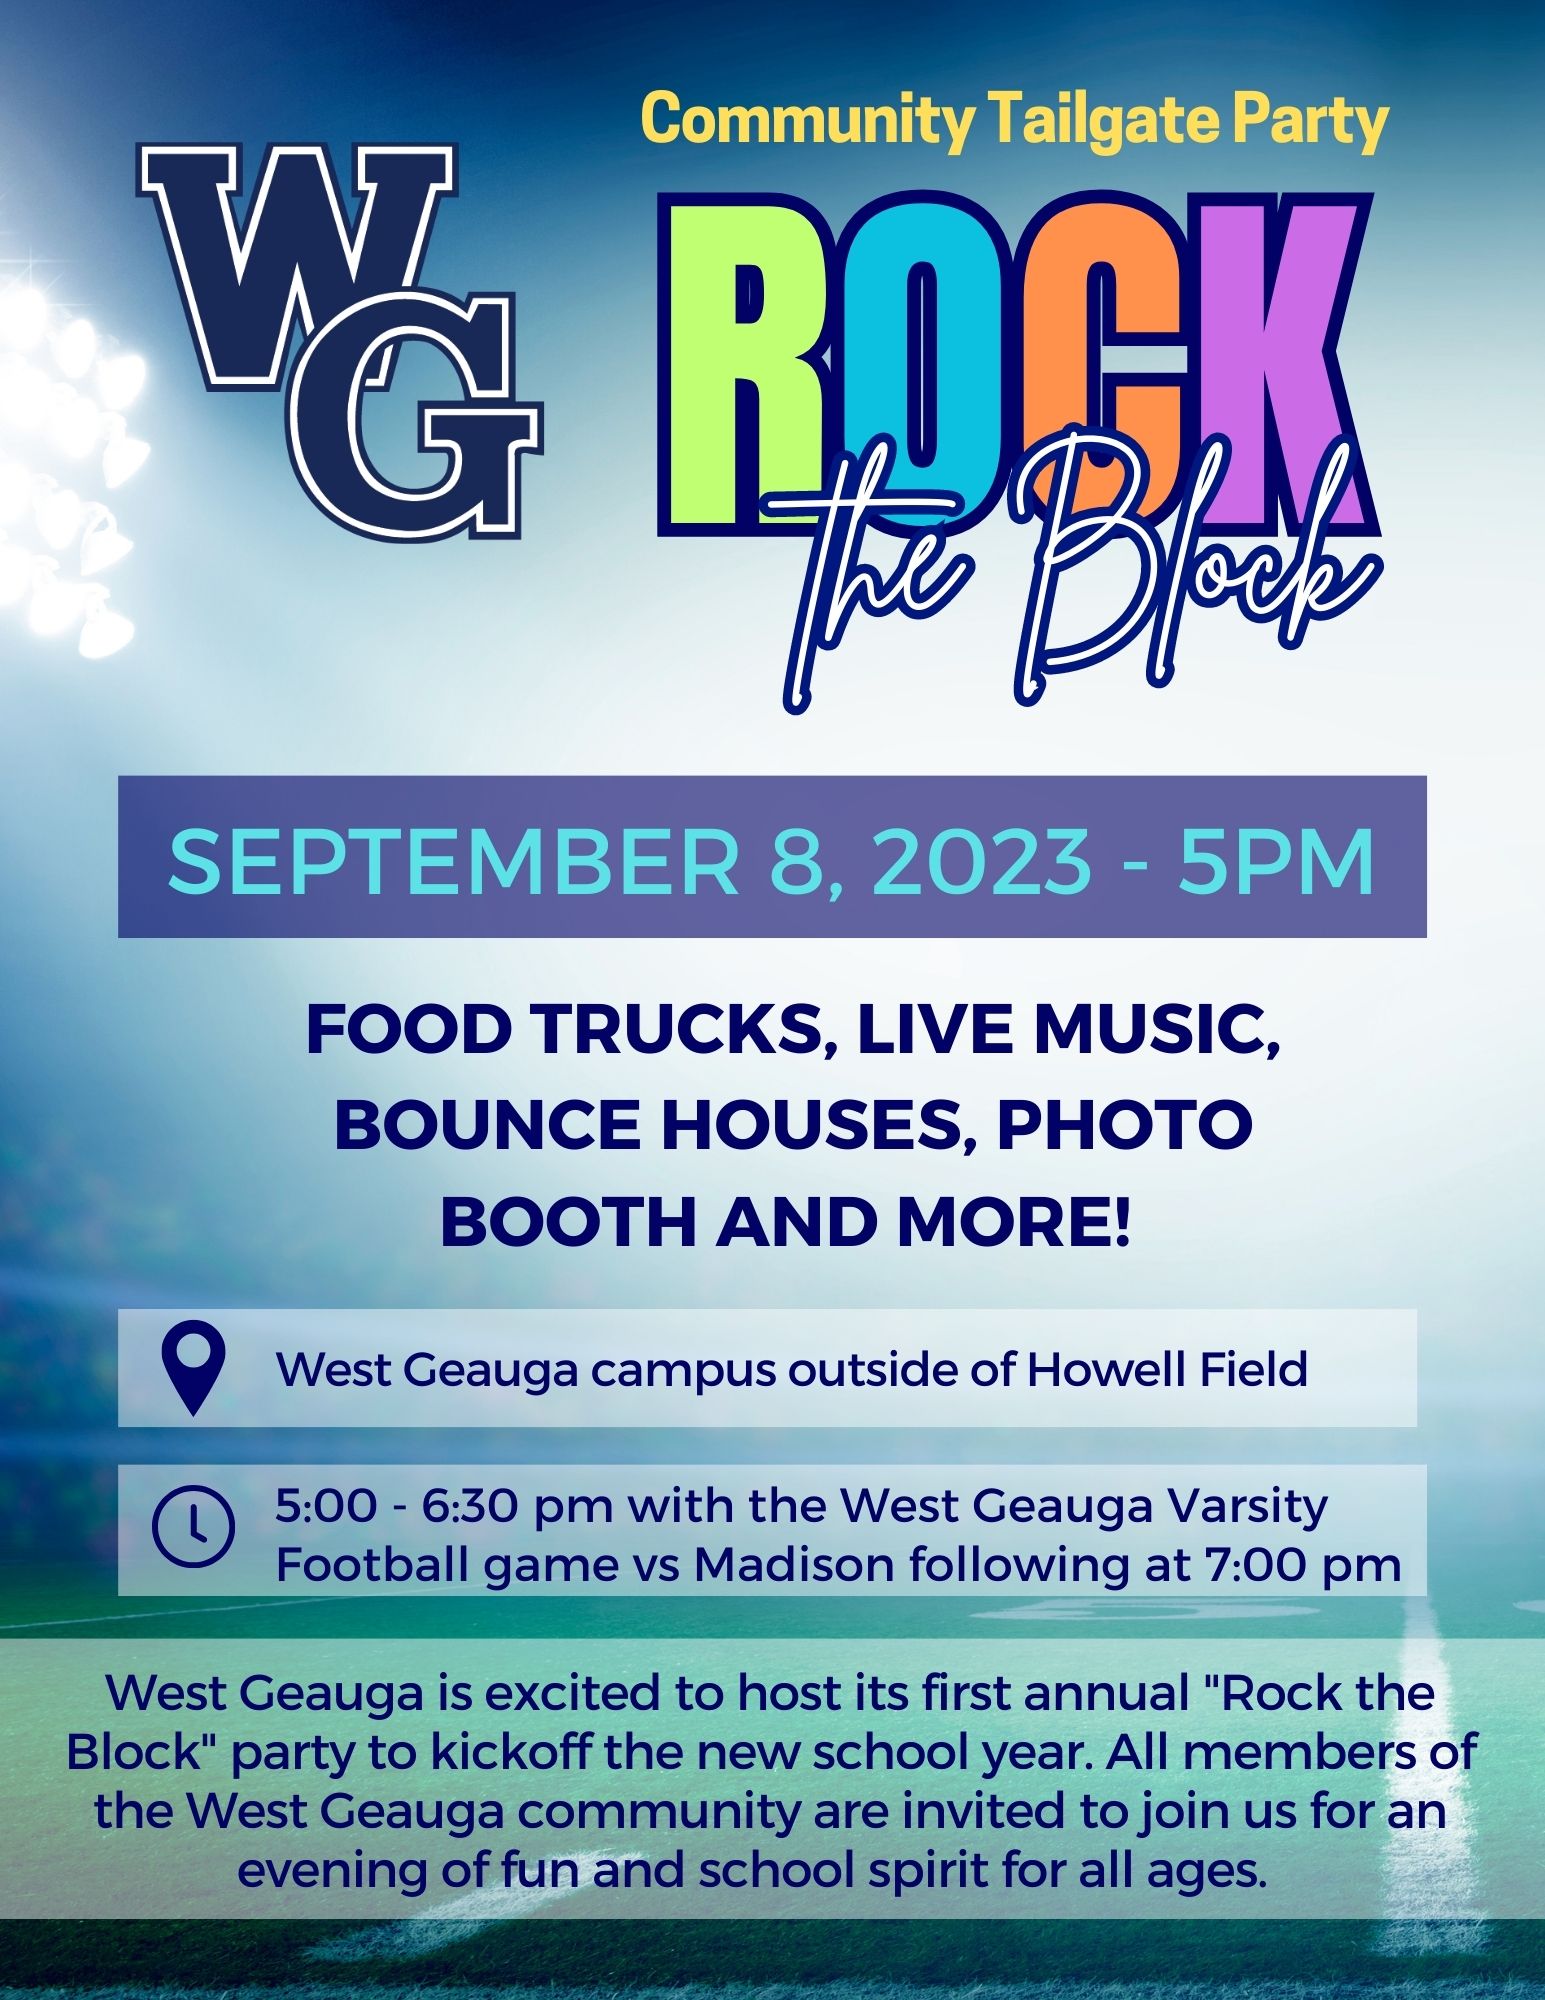 Rock the Block Tailgate Party